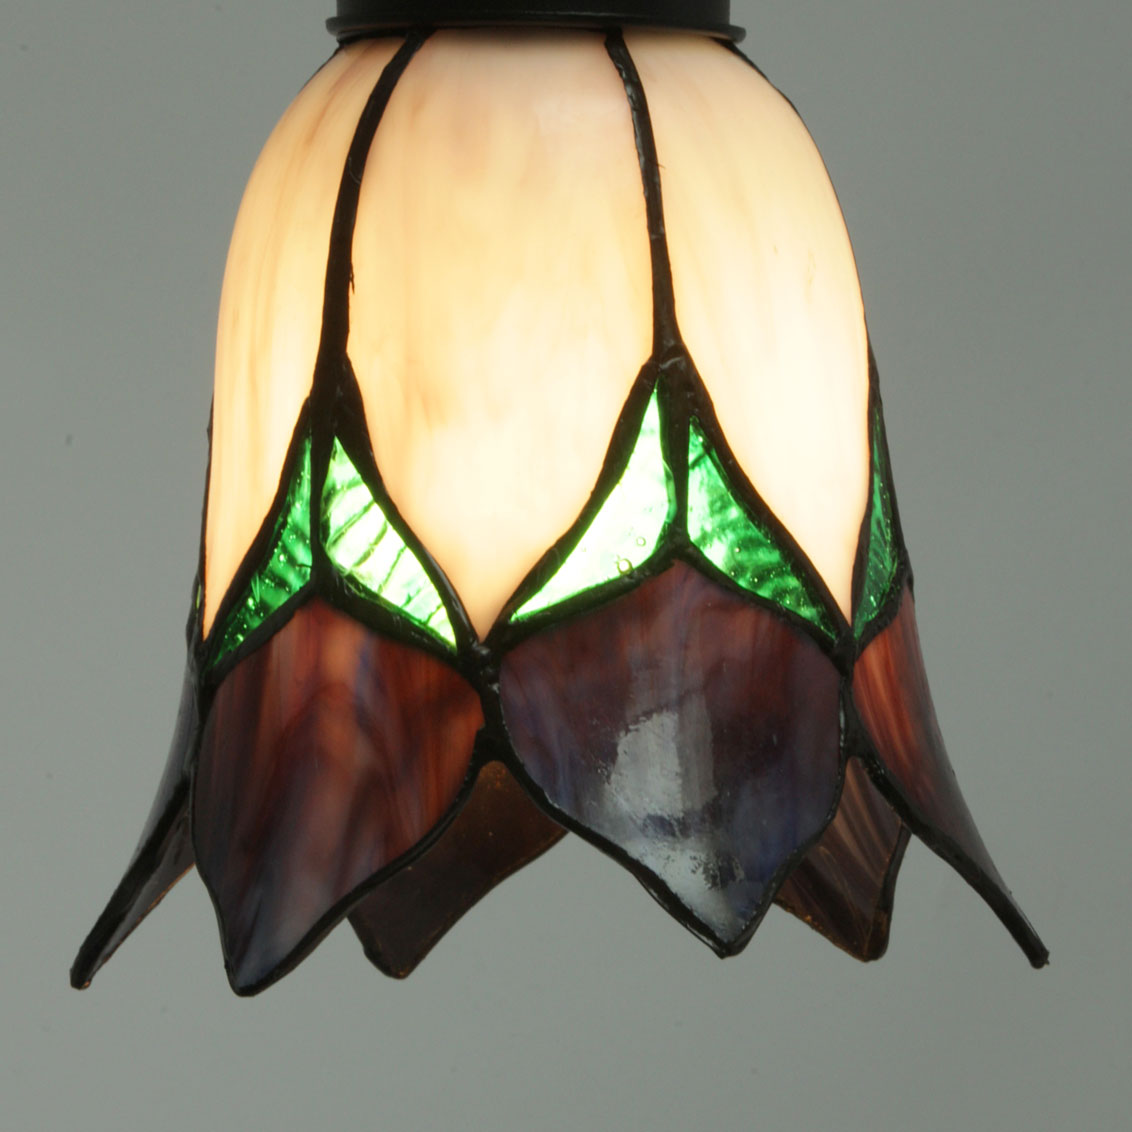 Small Tiffany glass ceiling lamp with purple tulip shade, Ø 12 cm, Fig. 4